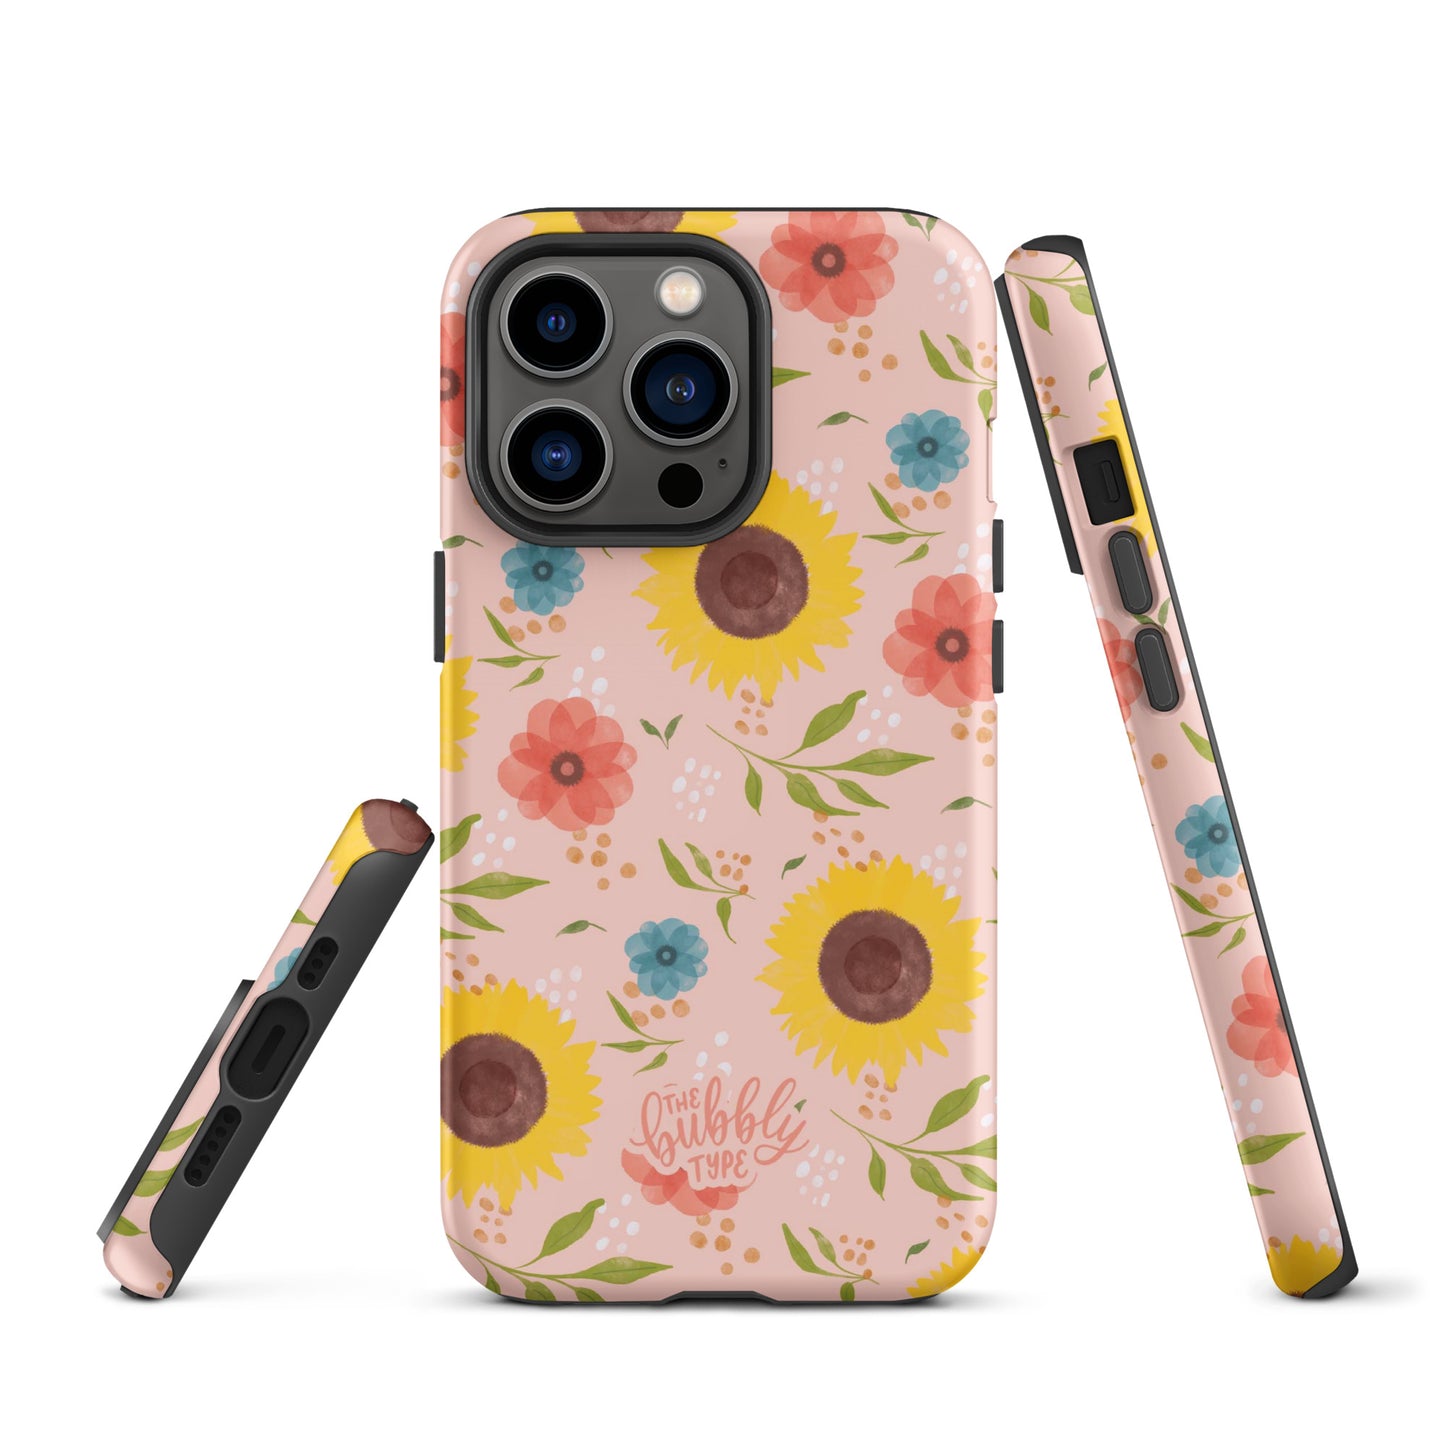 Sunflowers (Pink) Tough iPhone case